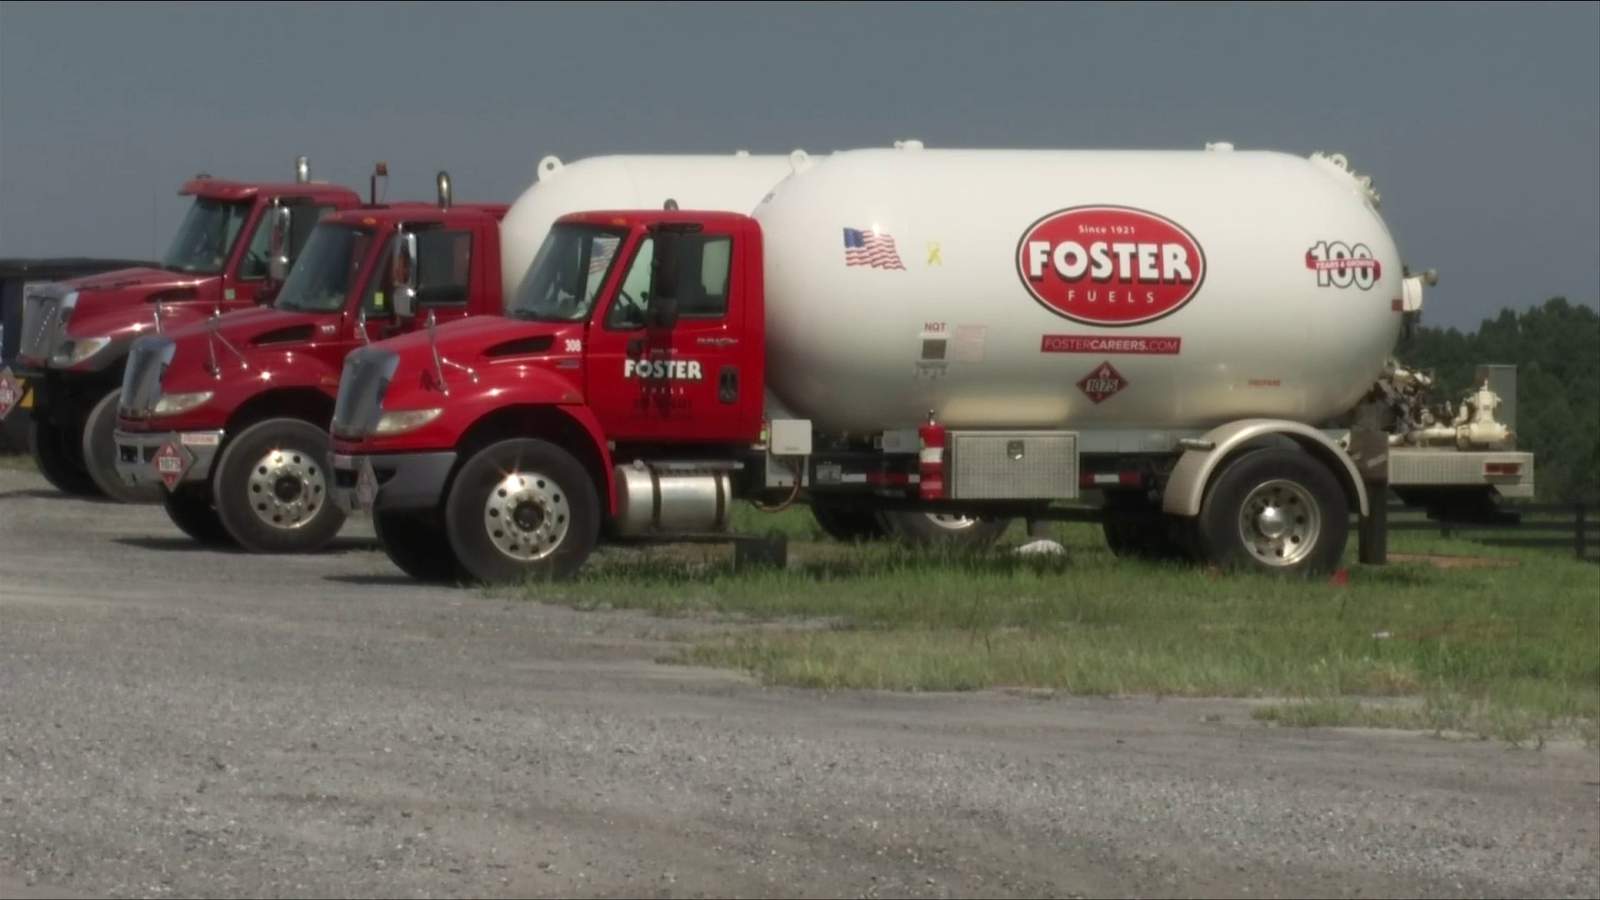 Foster Fuels sends 45 trucks to help hurricane victims